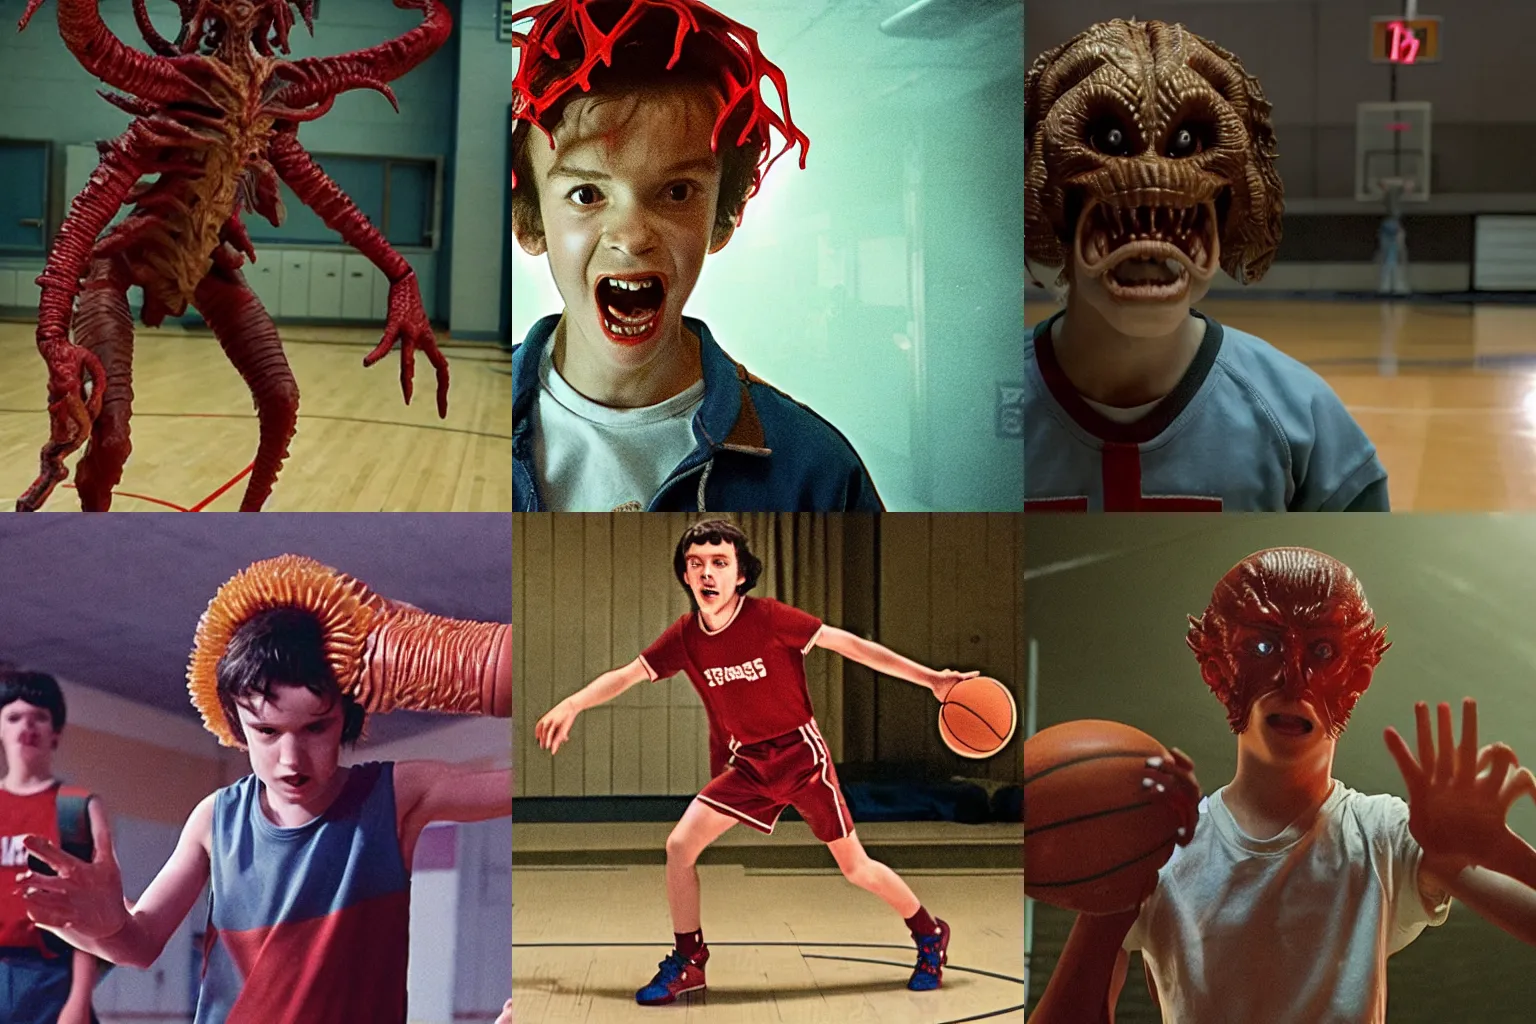 Prompt: Photo of the Demogorgon from Stranger Things playing basketball